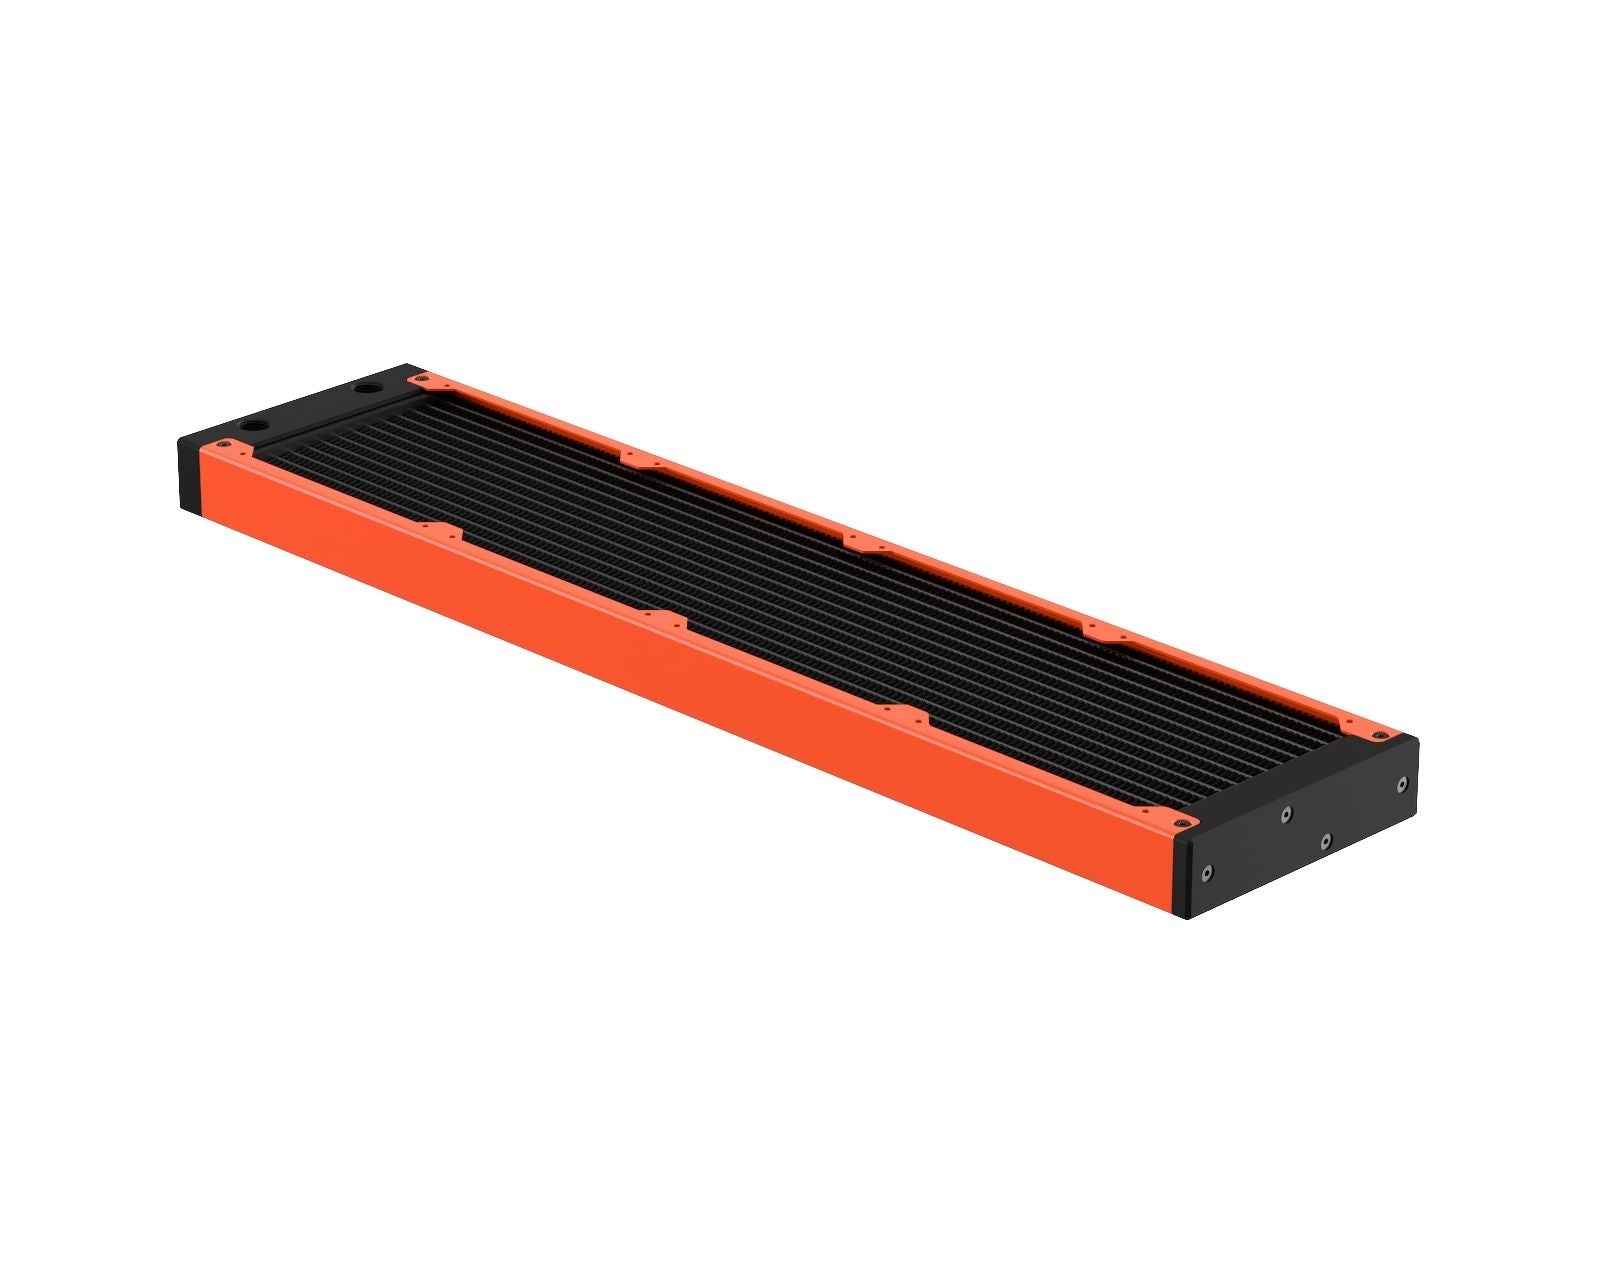 PrimoChill 480SL (30mm) EXIMO Modular Radiator, Black POM, 4x120mm, Quad Fan (R-SL-BK48) Available in 20+ Colors, Assembled in USA and Custom Watercooling Loop Ready - UV Orange